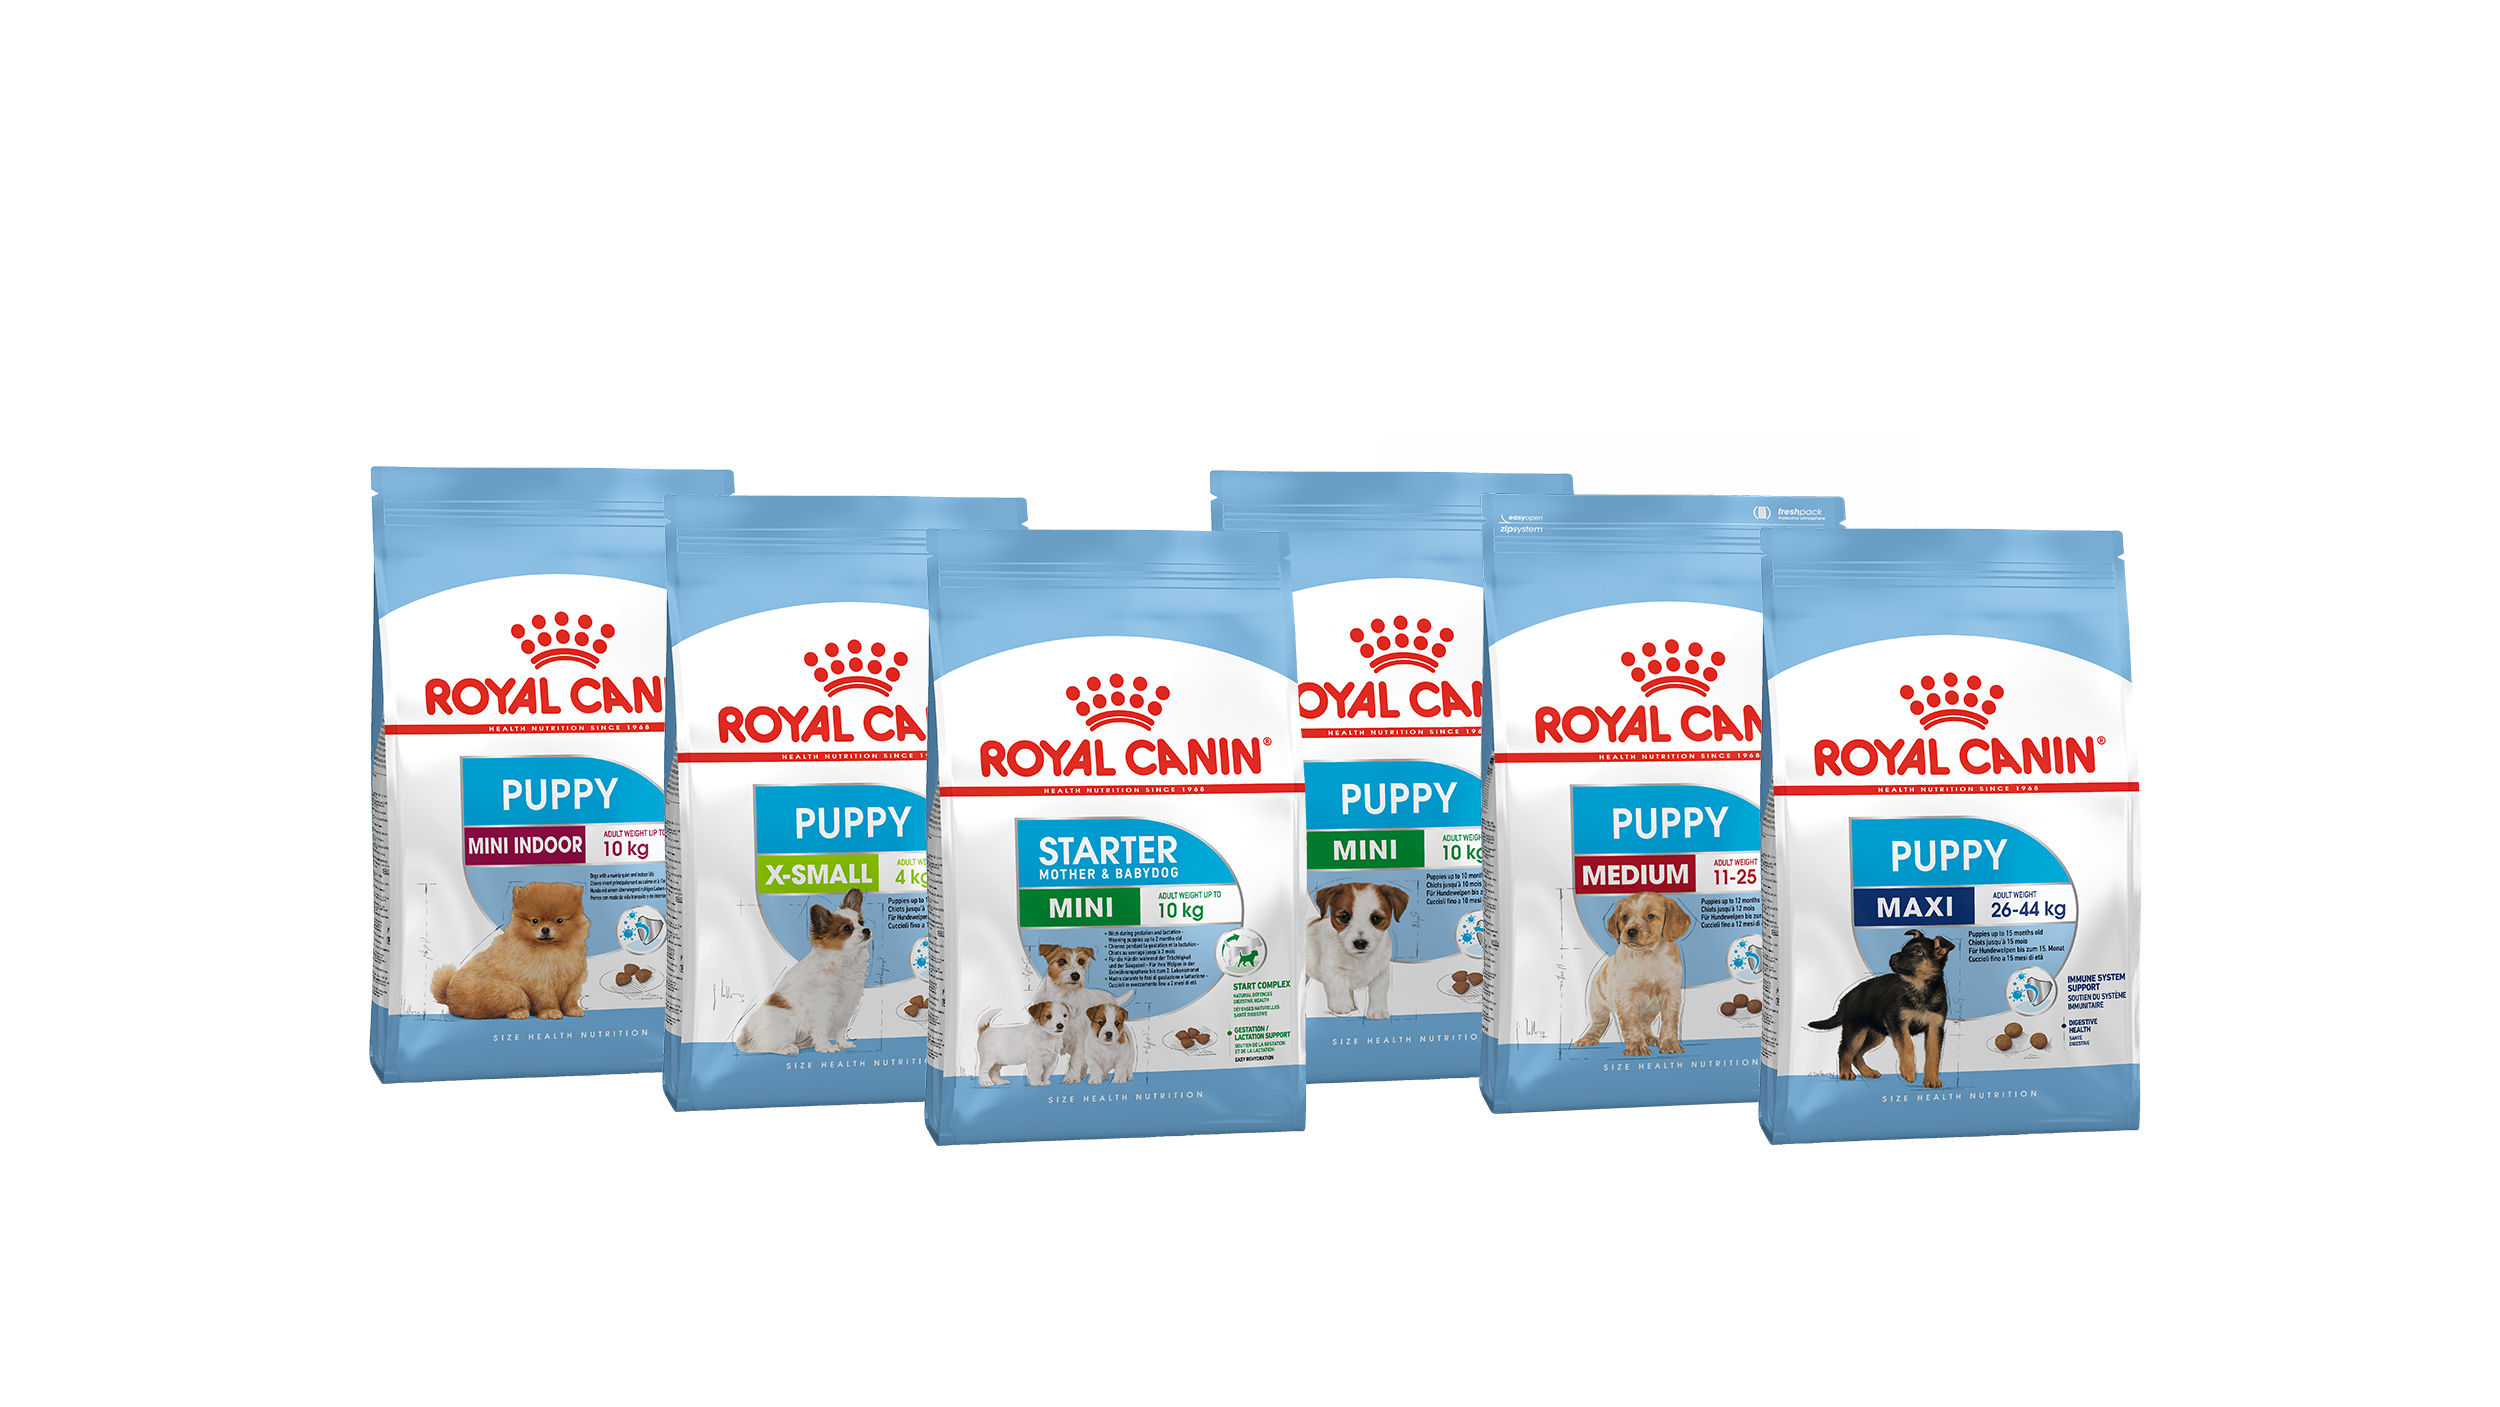 royal canin pediatric starter mother and baby dog